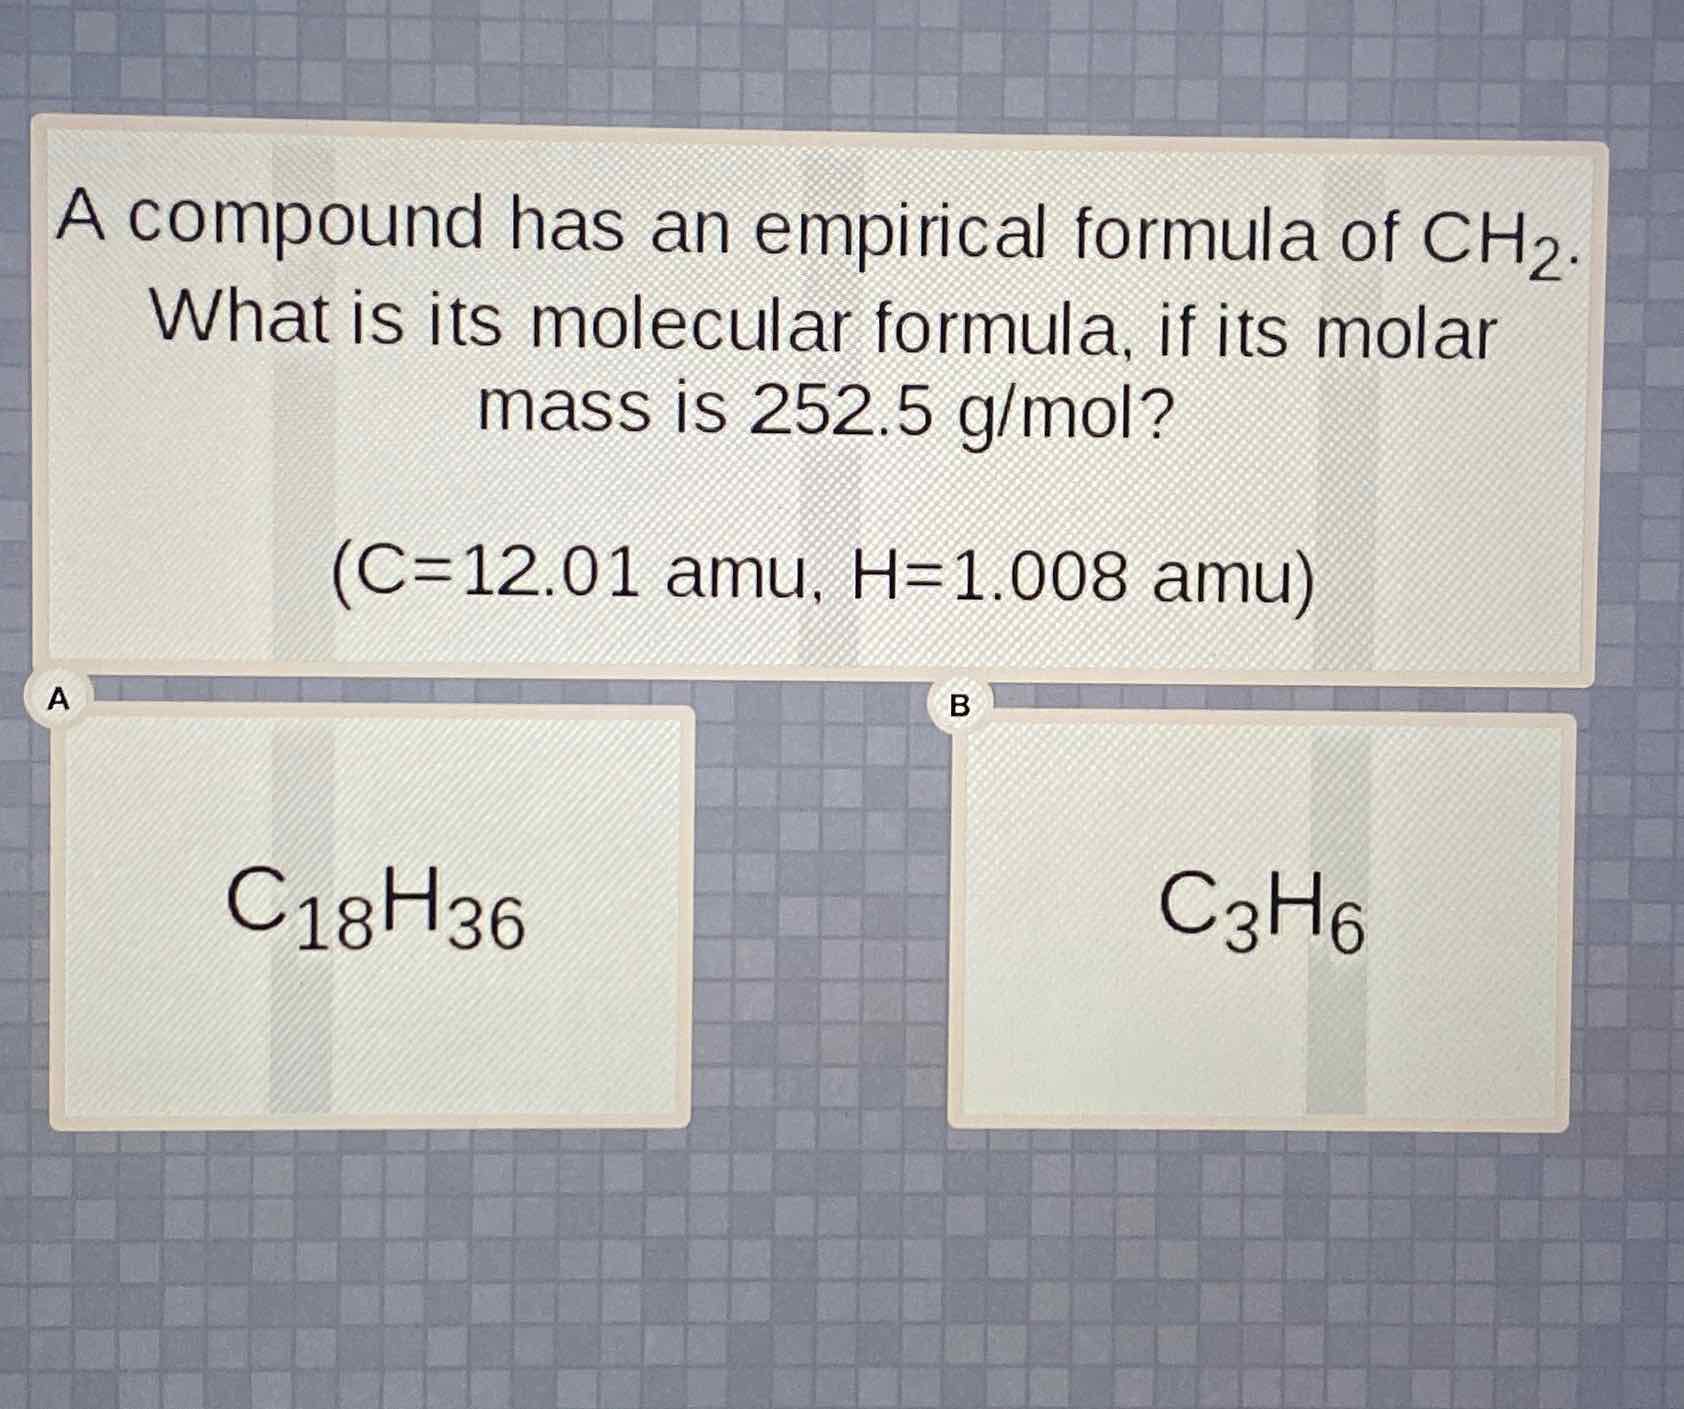 A compound has an empirical formula of \( \mathrm{CH}_{2} \). What is its molecular formula, if its molar mass is \( 252.5 \mathrm{~g} / \mathrm{mol} \) ?
\( (\mathrm{C}=12.01 \mathrm{amu}, \mathrm{H}=1.008 \mathrm{amu}) \)
\( \mathrm{C}_{18} \mathrm{H}_{36} \)
\( \mathrm{C}_{3} \mathrm{H}_{6} \)